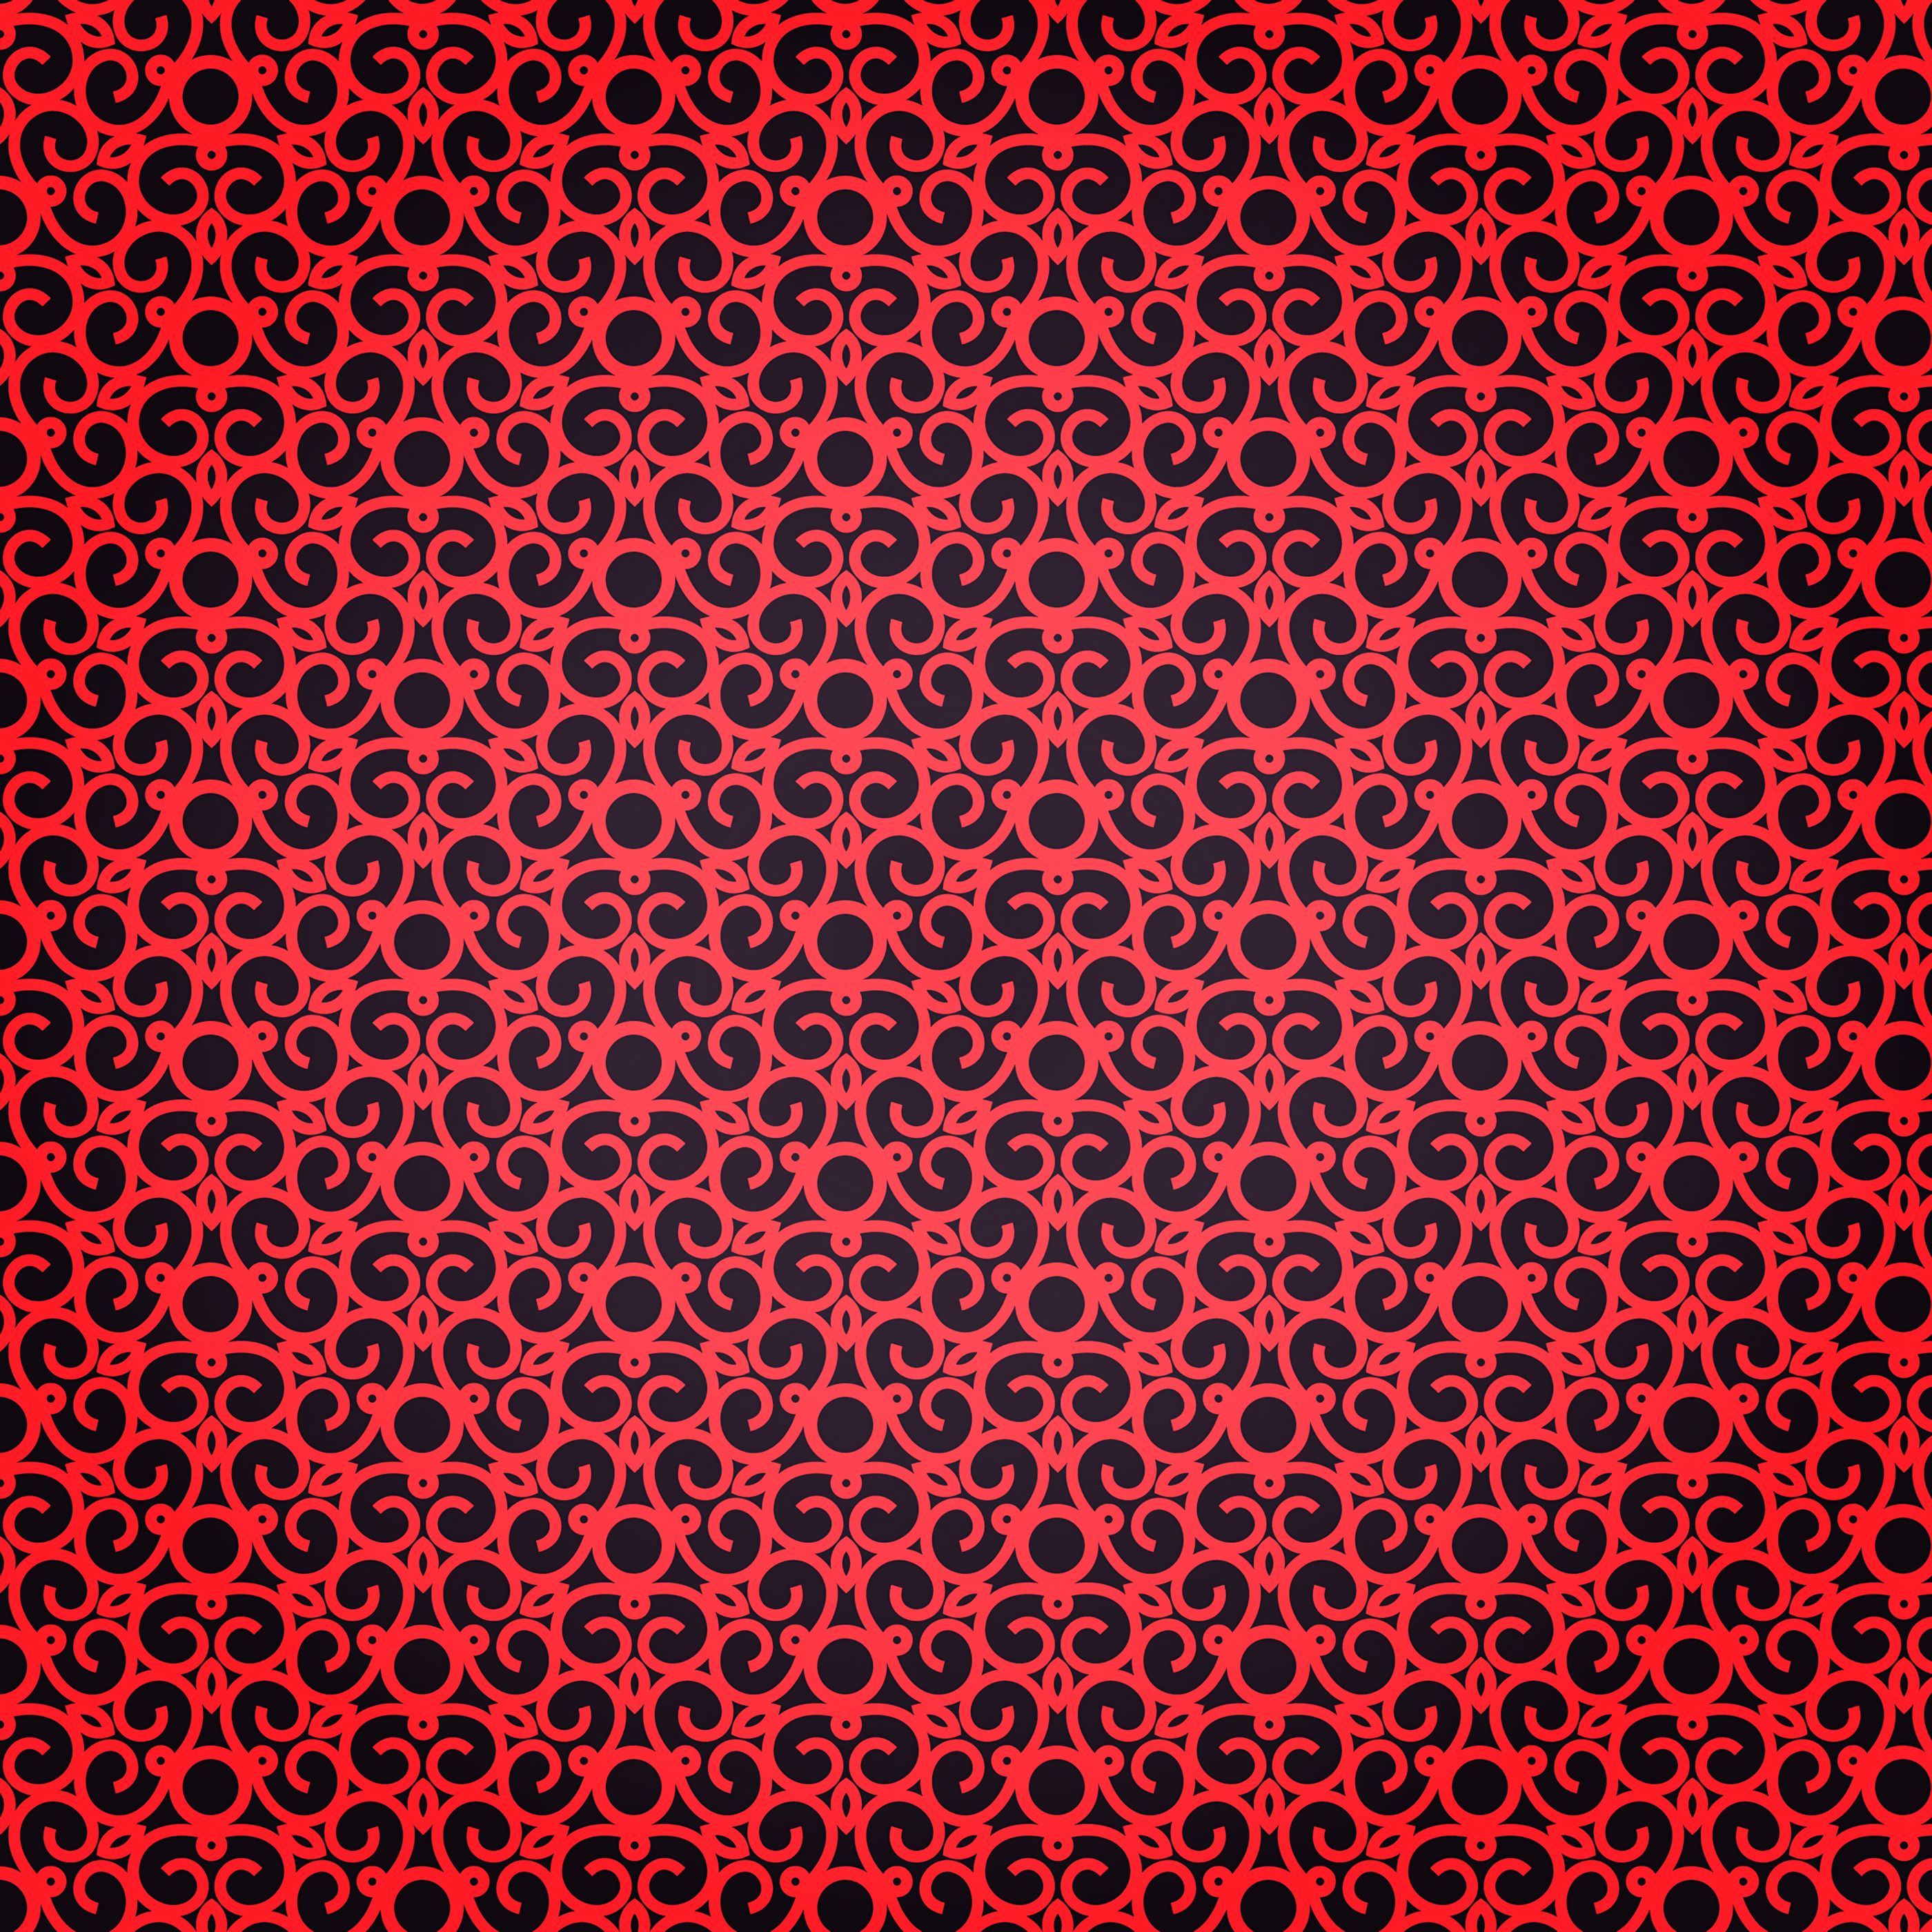 texture, patterns, black, red, textures, swirling, involute wallpaper for mobile